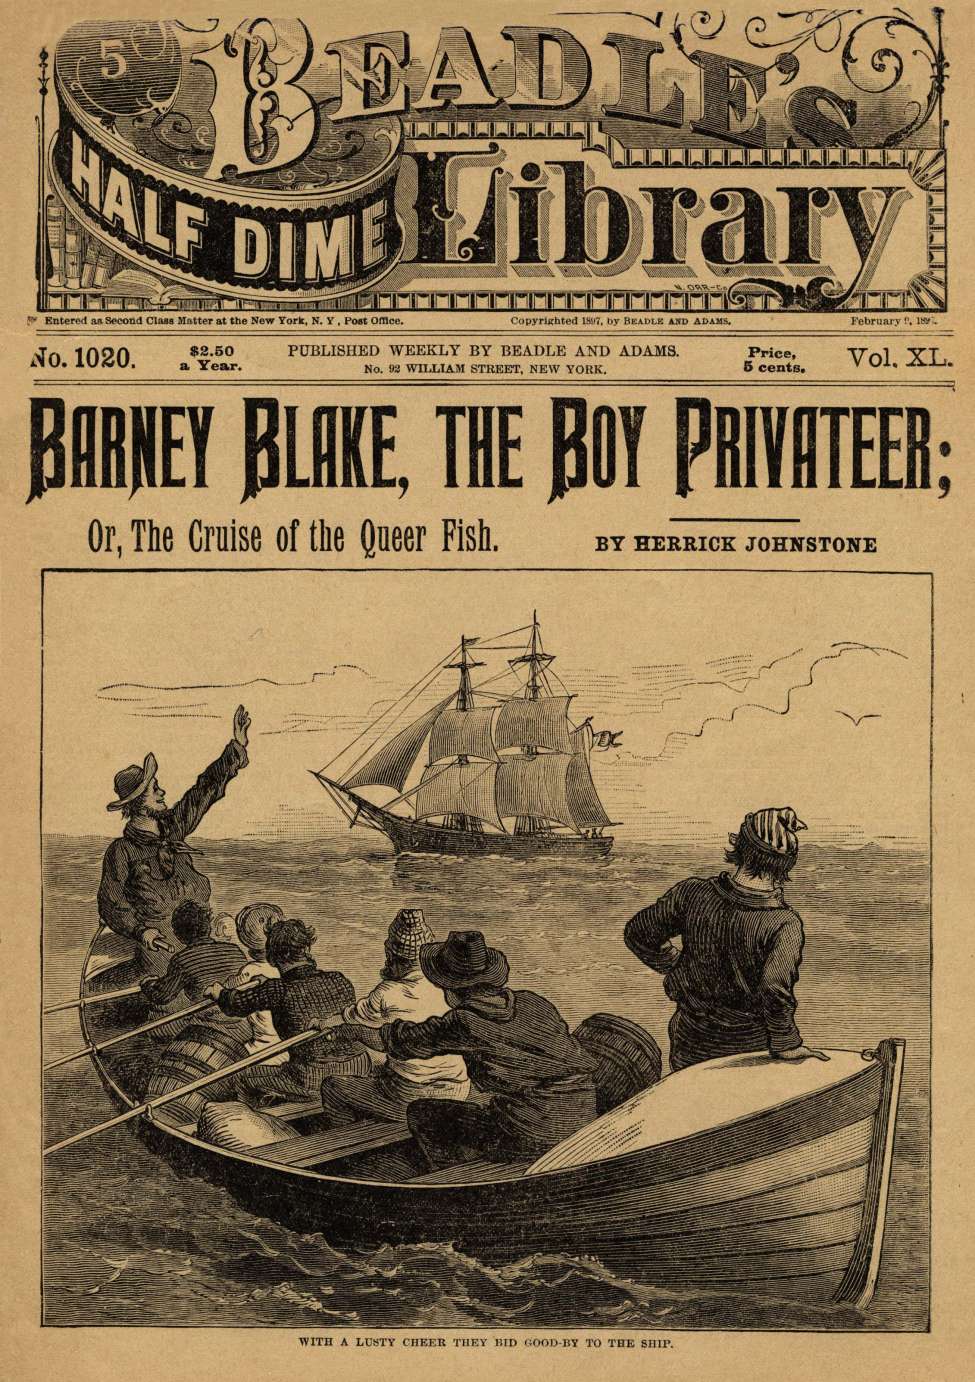 Book Cover For Beadle's Half Dime Library 1020 - Barney Blake, the Boy Privateer